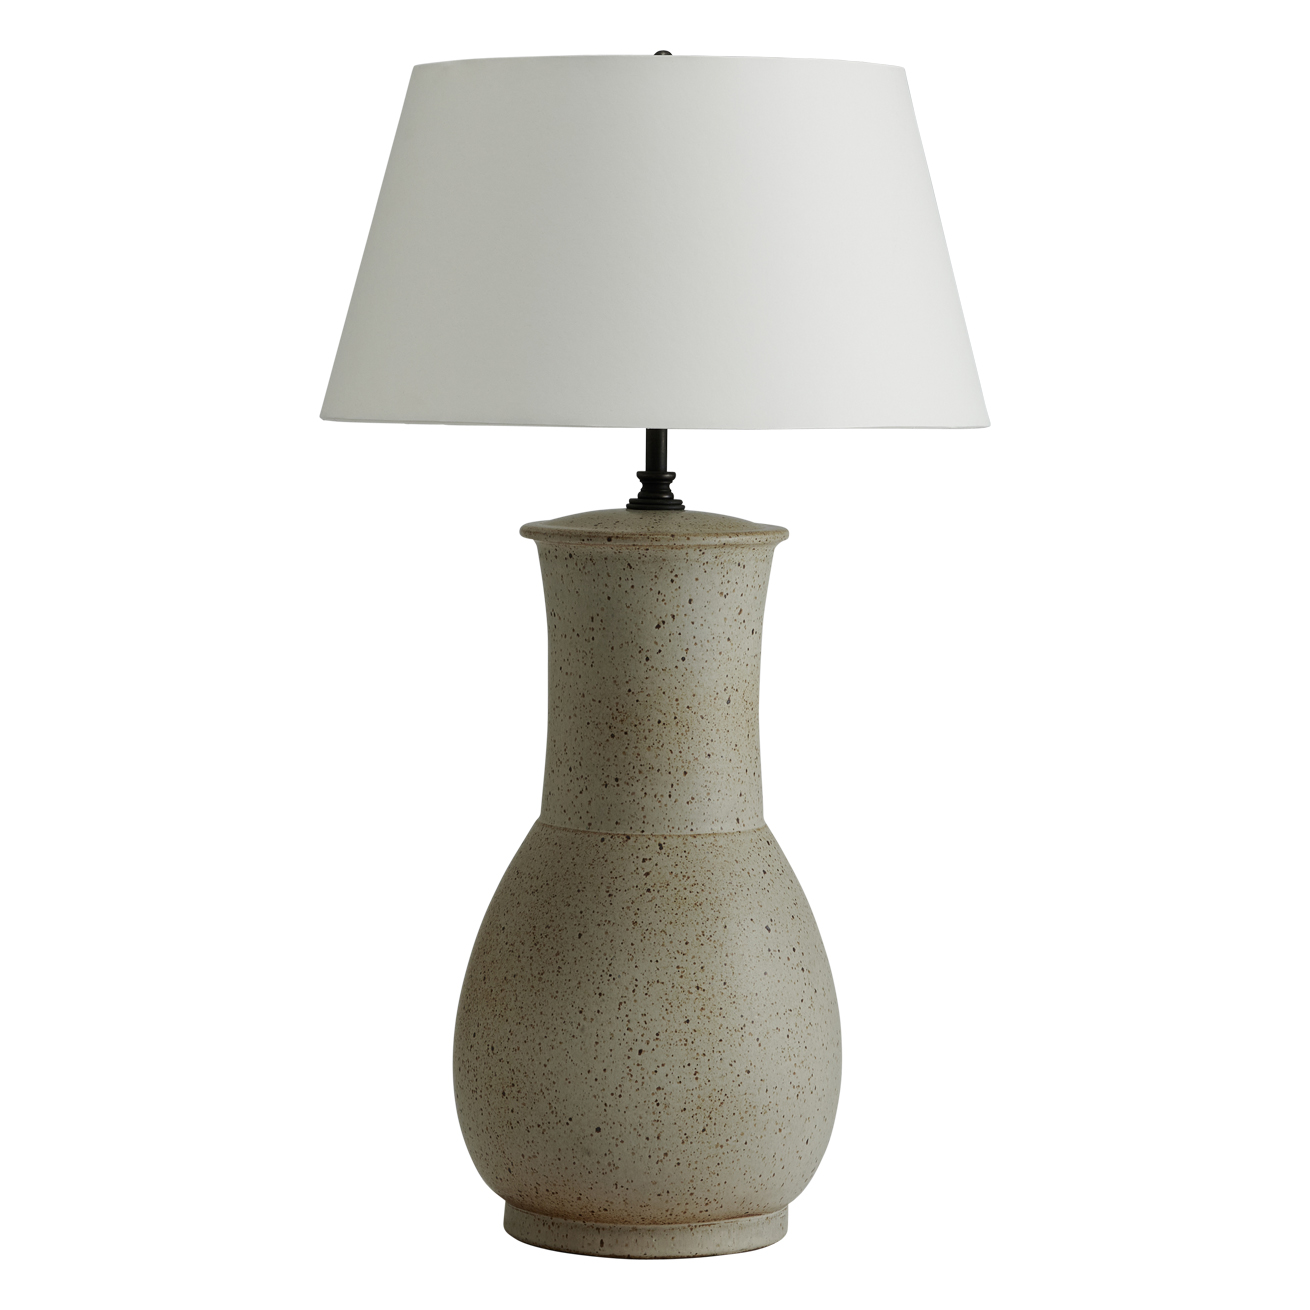 Aanklager Afstotend Rationeel Dilly Table Lamp - Rose Tarlow